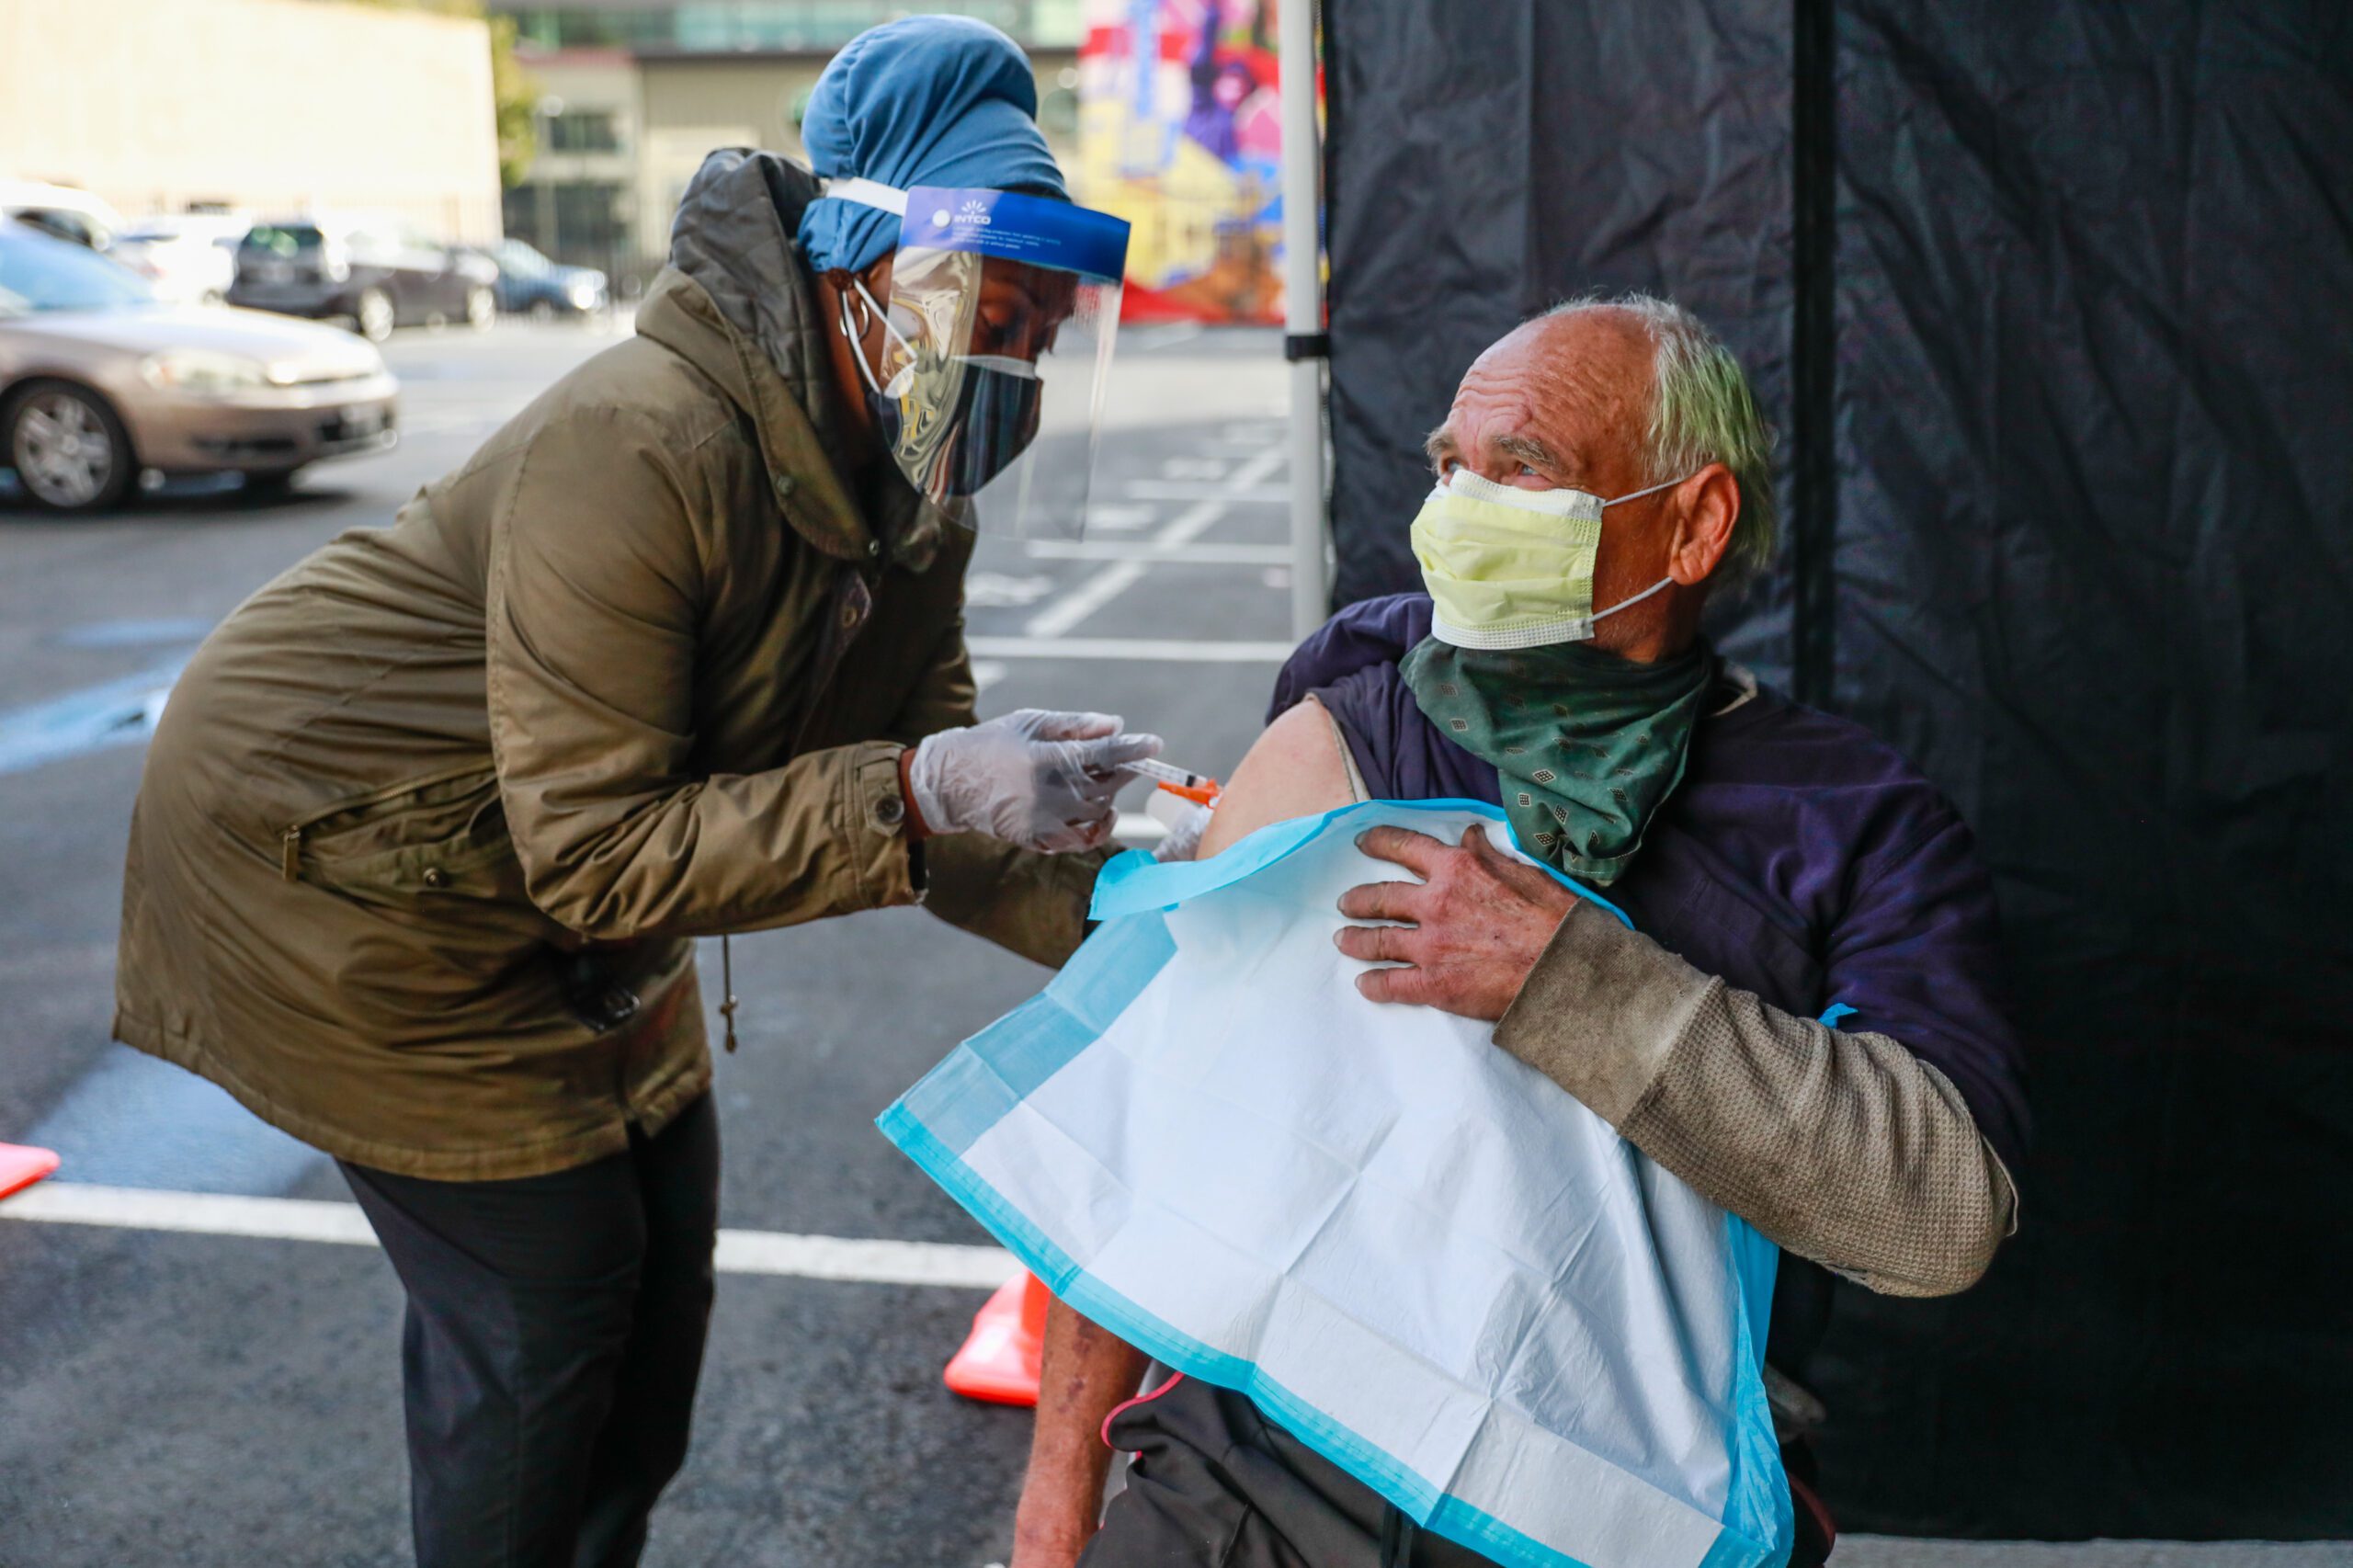 A nurse administers a COVID vaccine to an unhoused person.